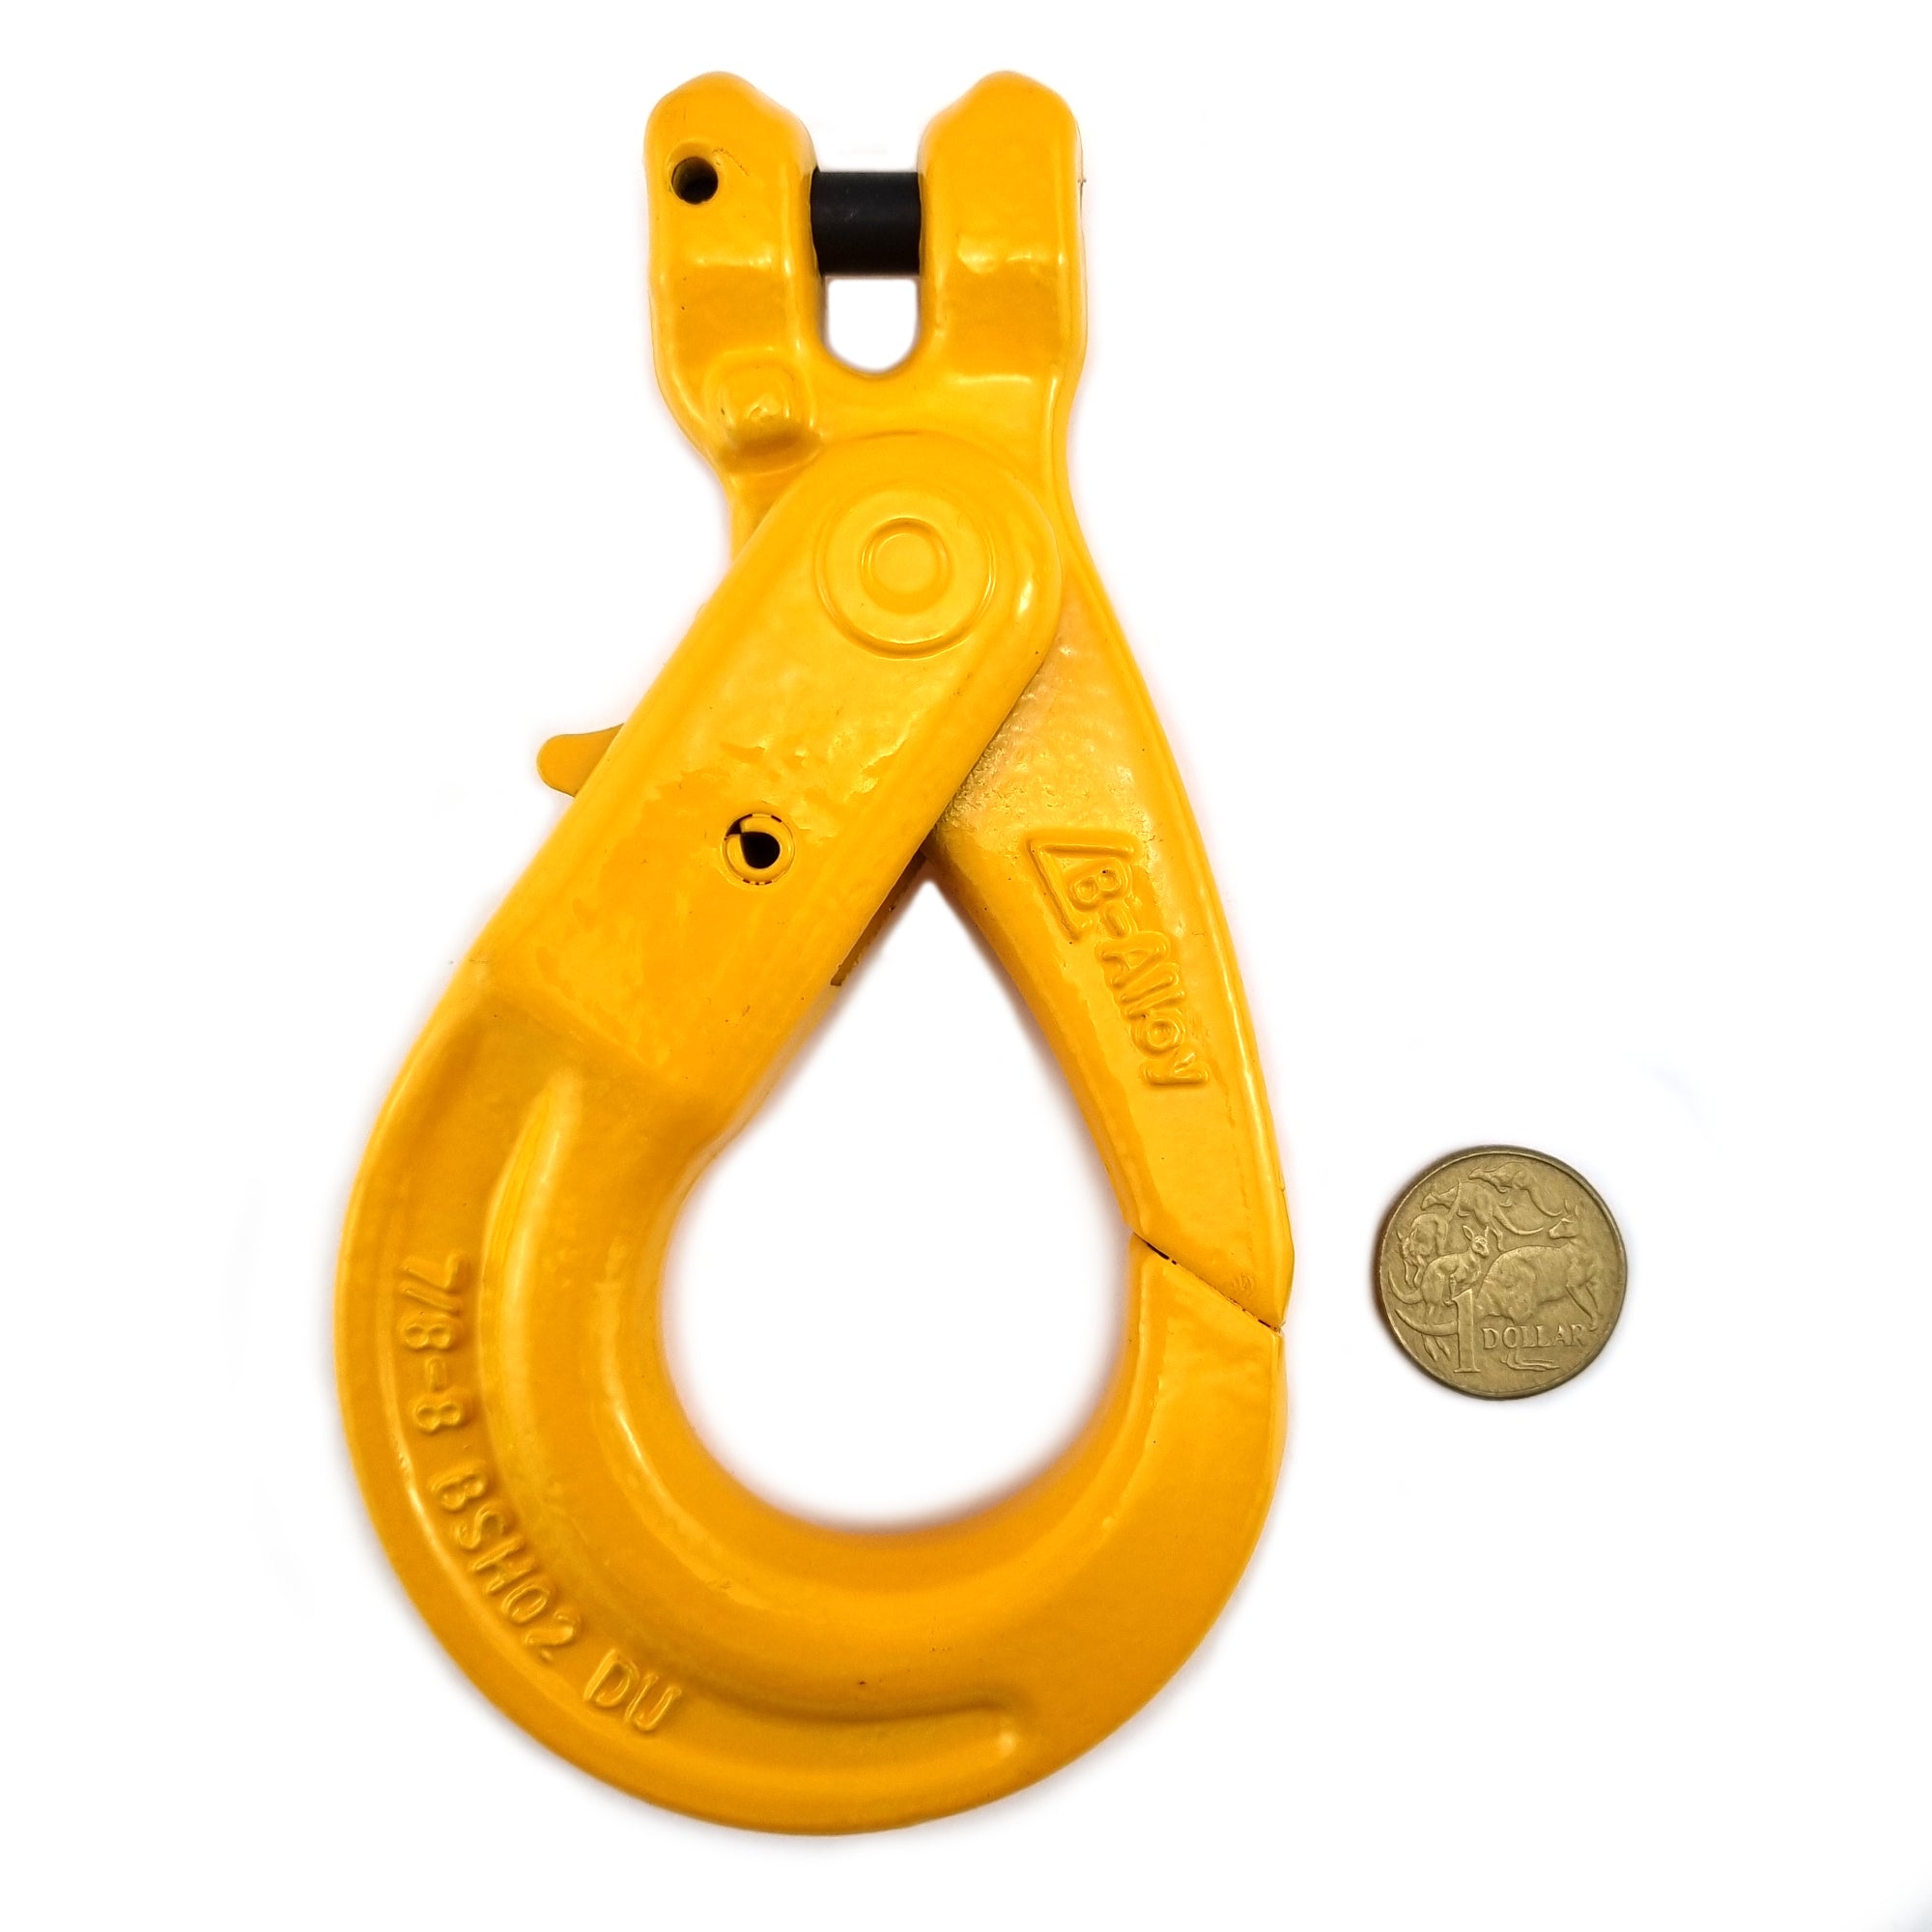 8mm Clevis self locking hook, grade T(80) with 2 tonne rating. Shop chain.com.au